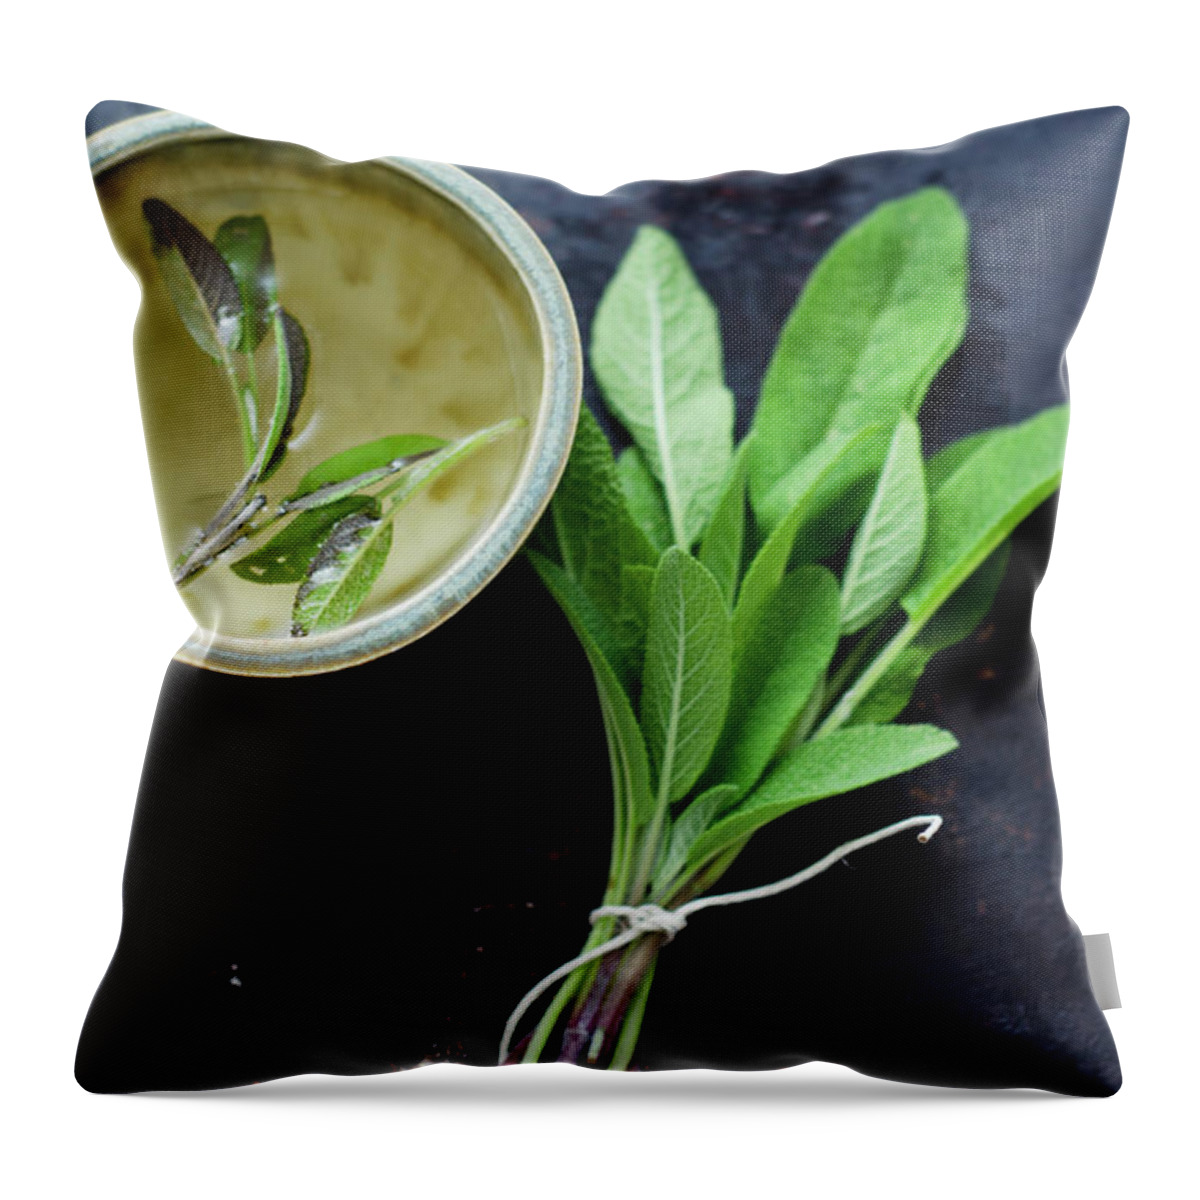 Spice Throw Pillow featuring the photograph Sage Tea In Small Cup With Bunch Of by Westend61